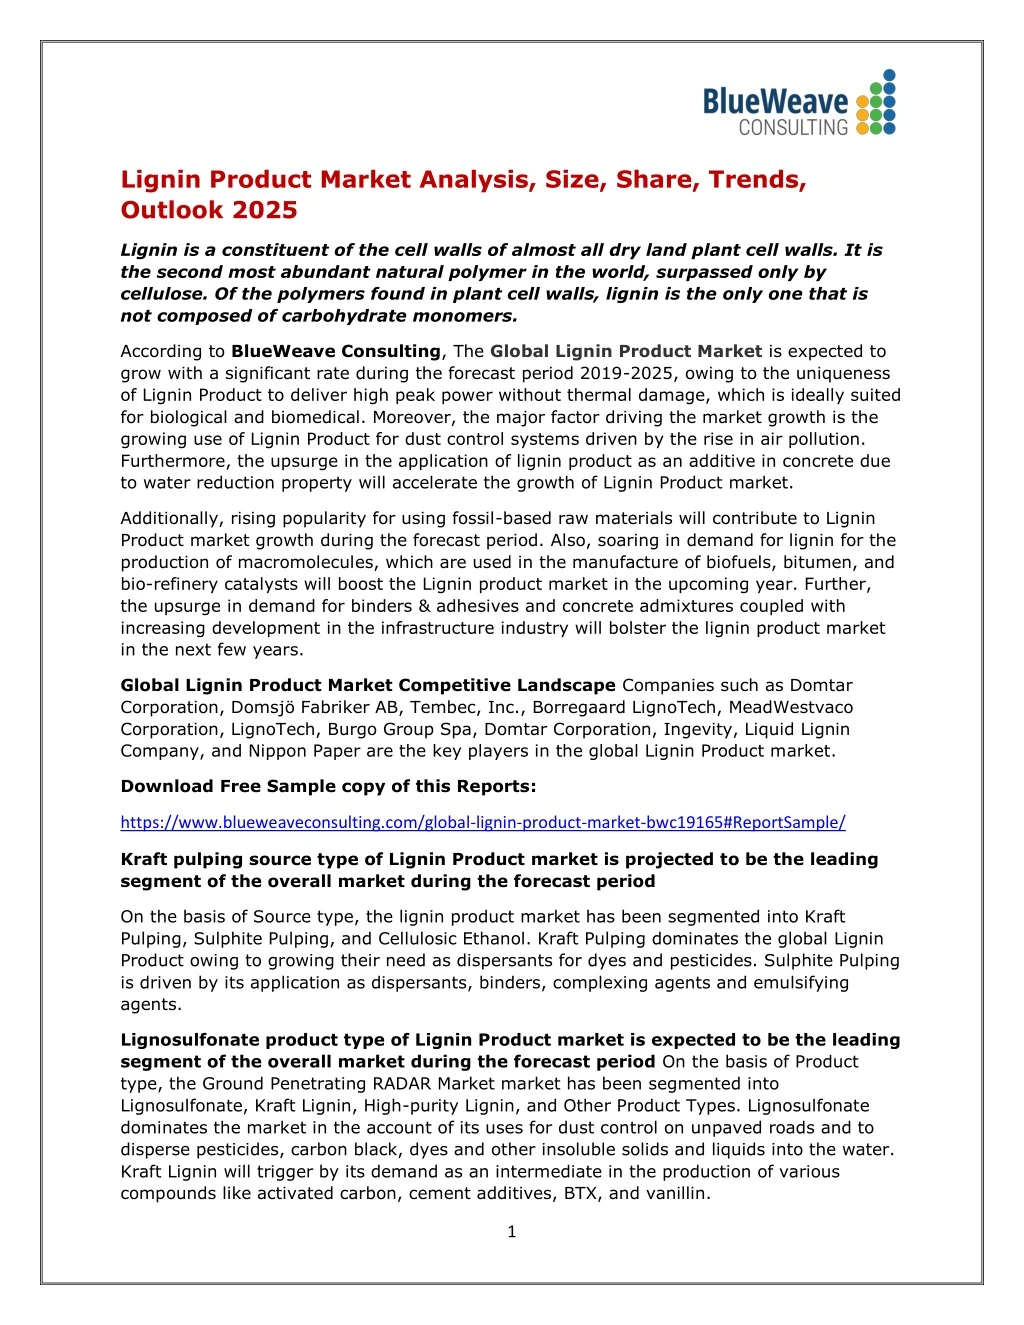 lignin product market analysis size share trends